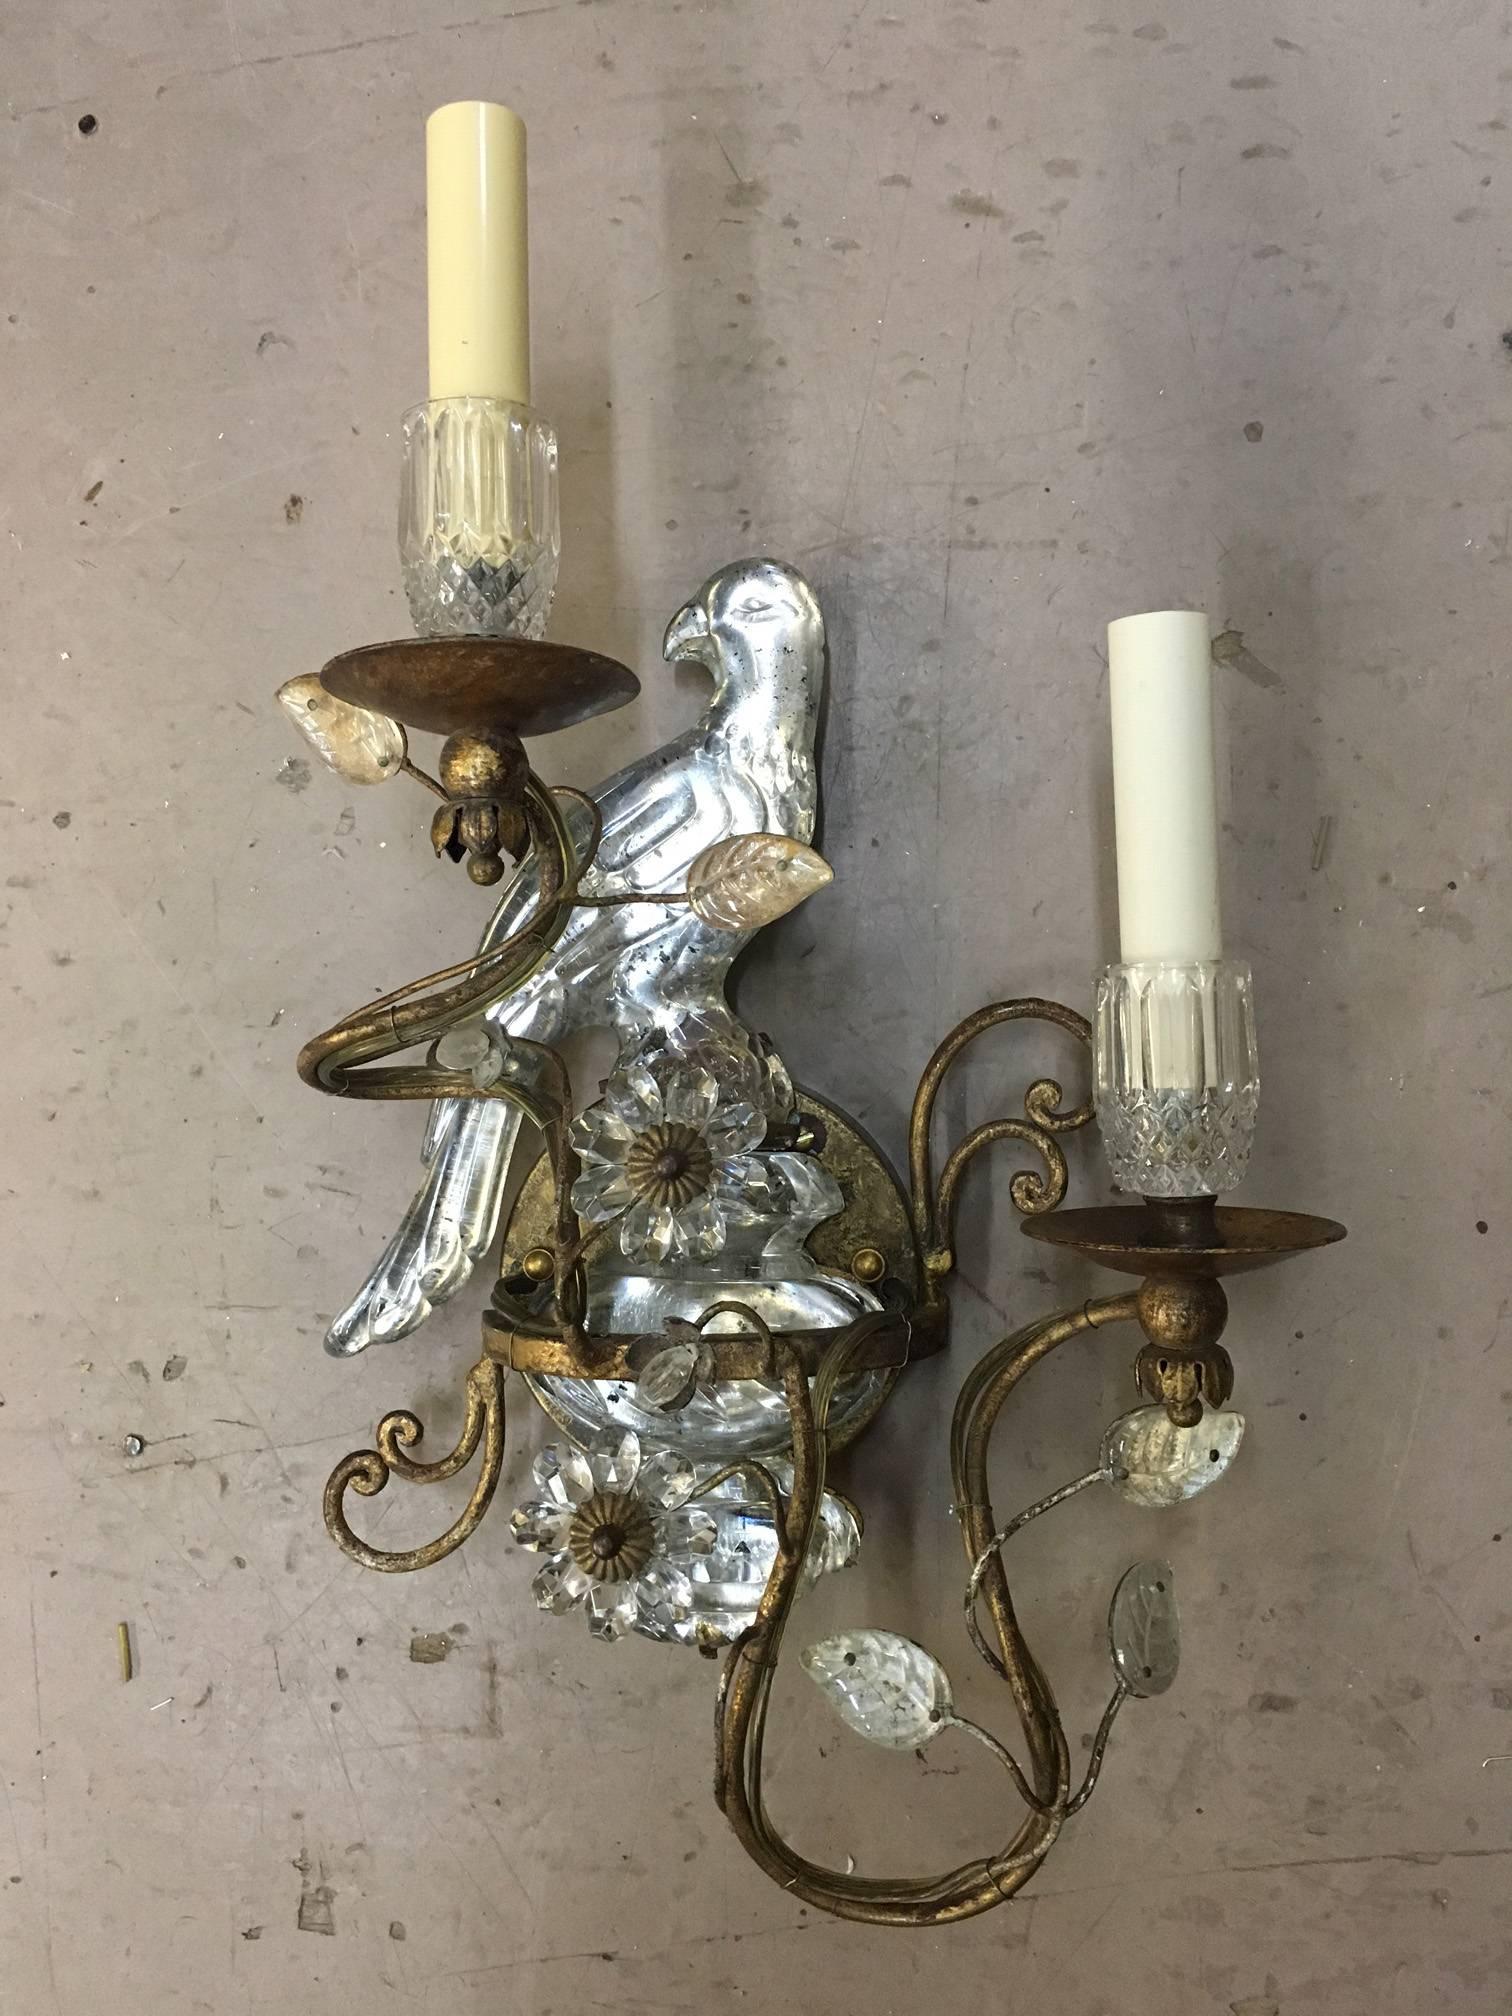 Classic pair of Bagues style sconces, each modeled as a parrot perched on an urn and with two lights modeled as scrolling flowering branches.
Both parrots and urns are molded crystal and silver- leaf backed, which gives them a magical quality when